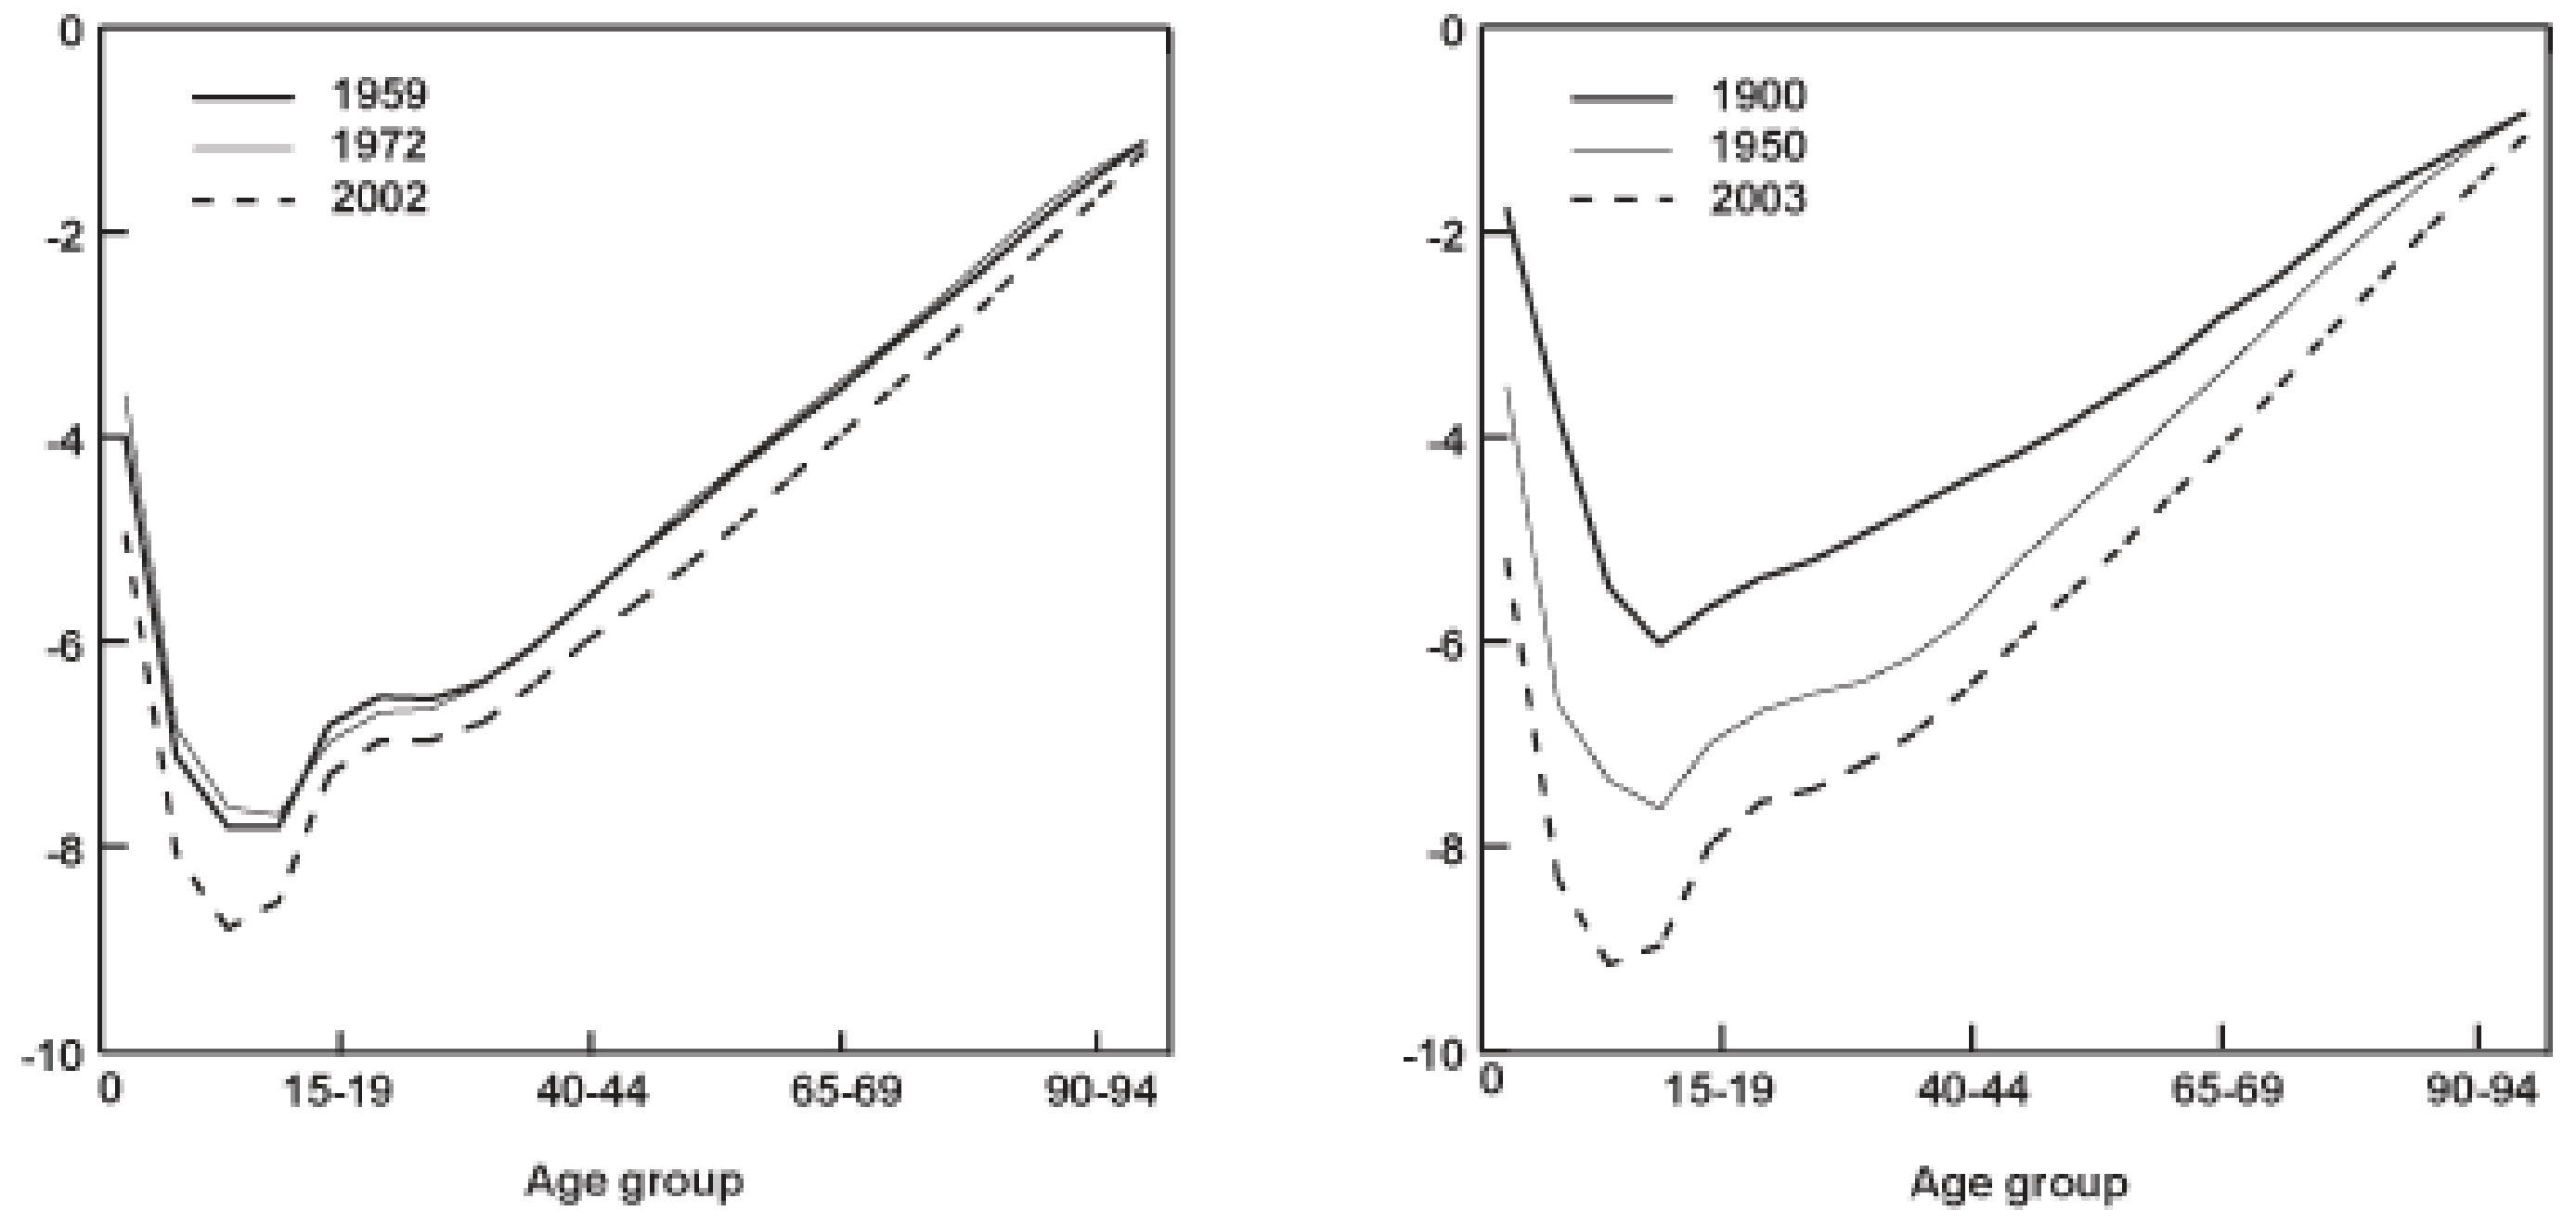 Logarithmic mortality curves for British and American populations at different points in the 20th century.